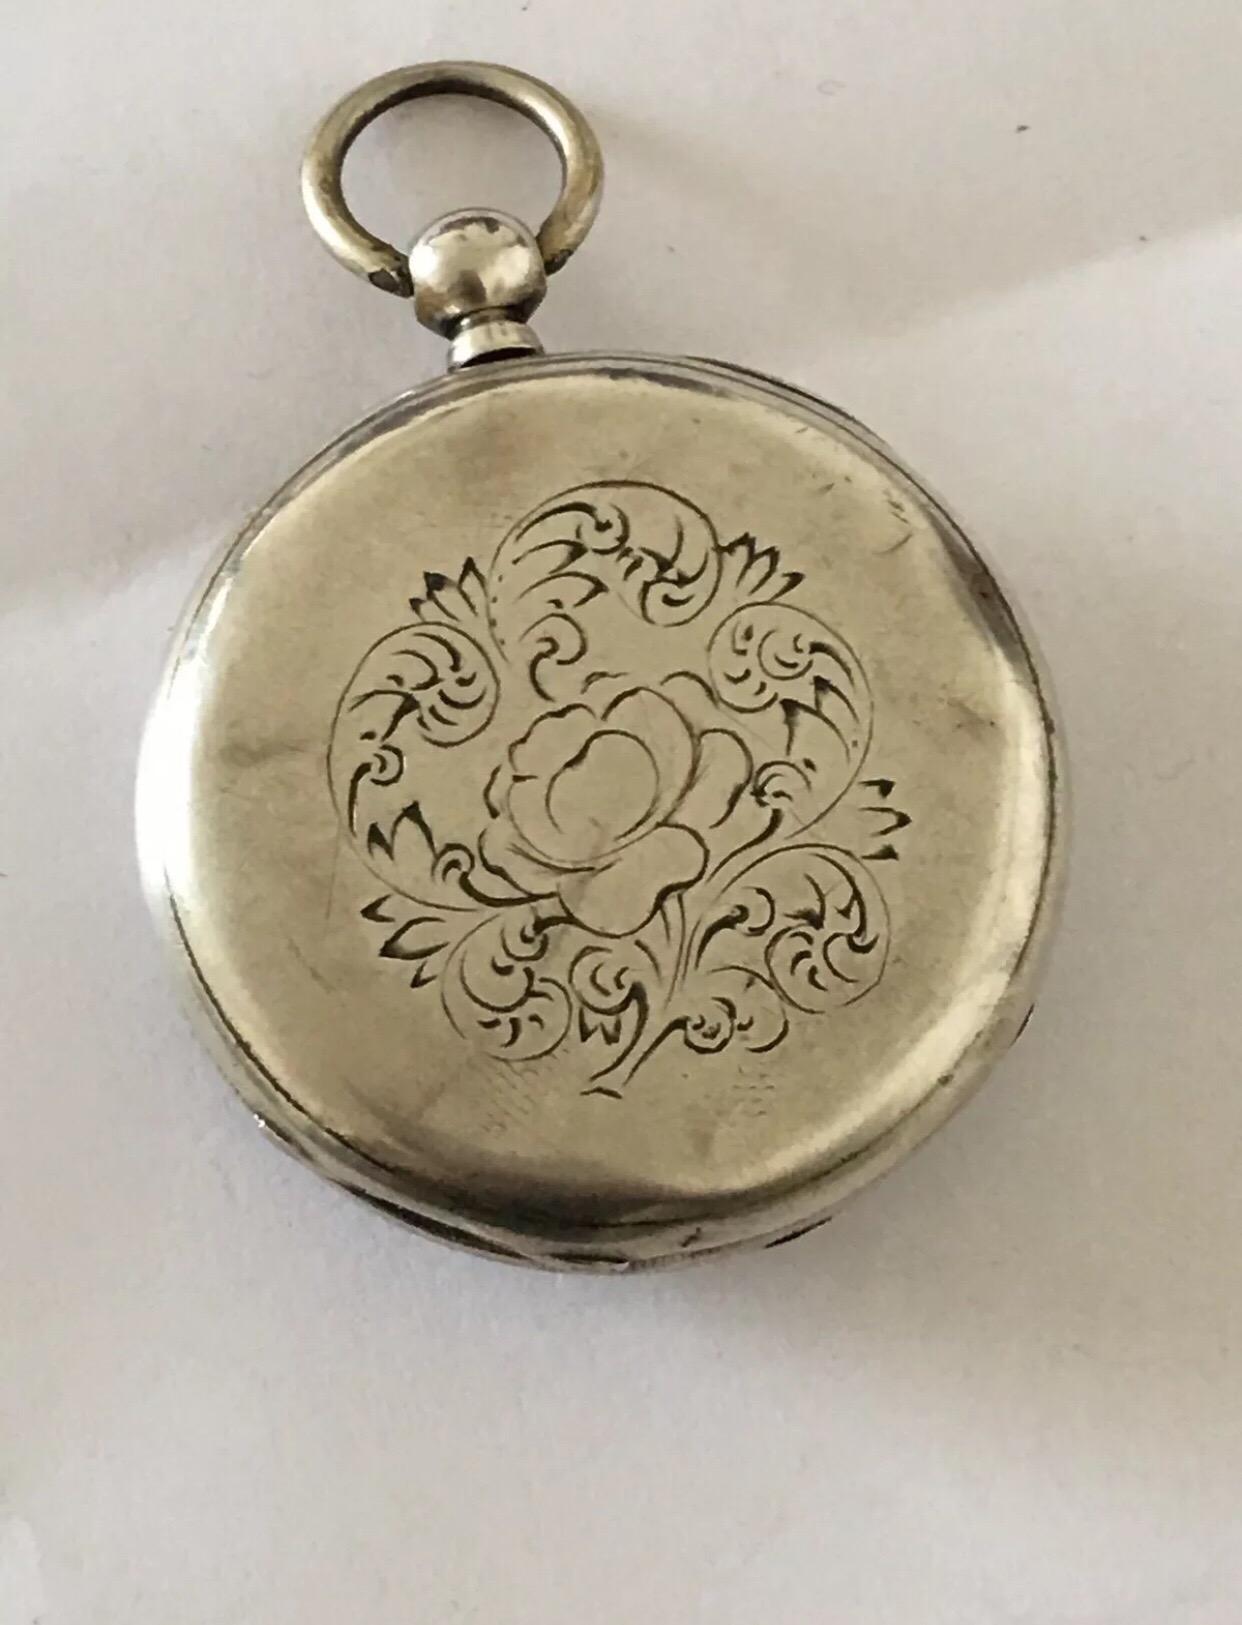 
Antique Silver Key-wind Pocket Watch With Very Fine Hands.

This pocket watch is working and it is ticking well. Visible cracks on the Dial and some small dent on the back case as seen on photos. Please study the photos carefully as form part of